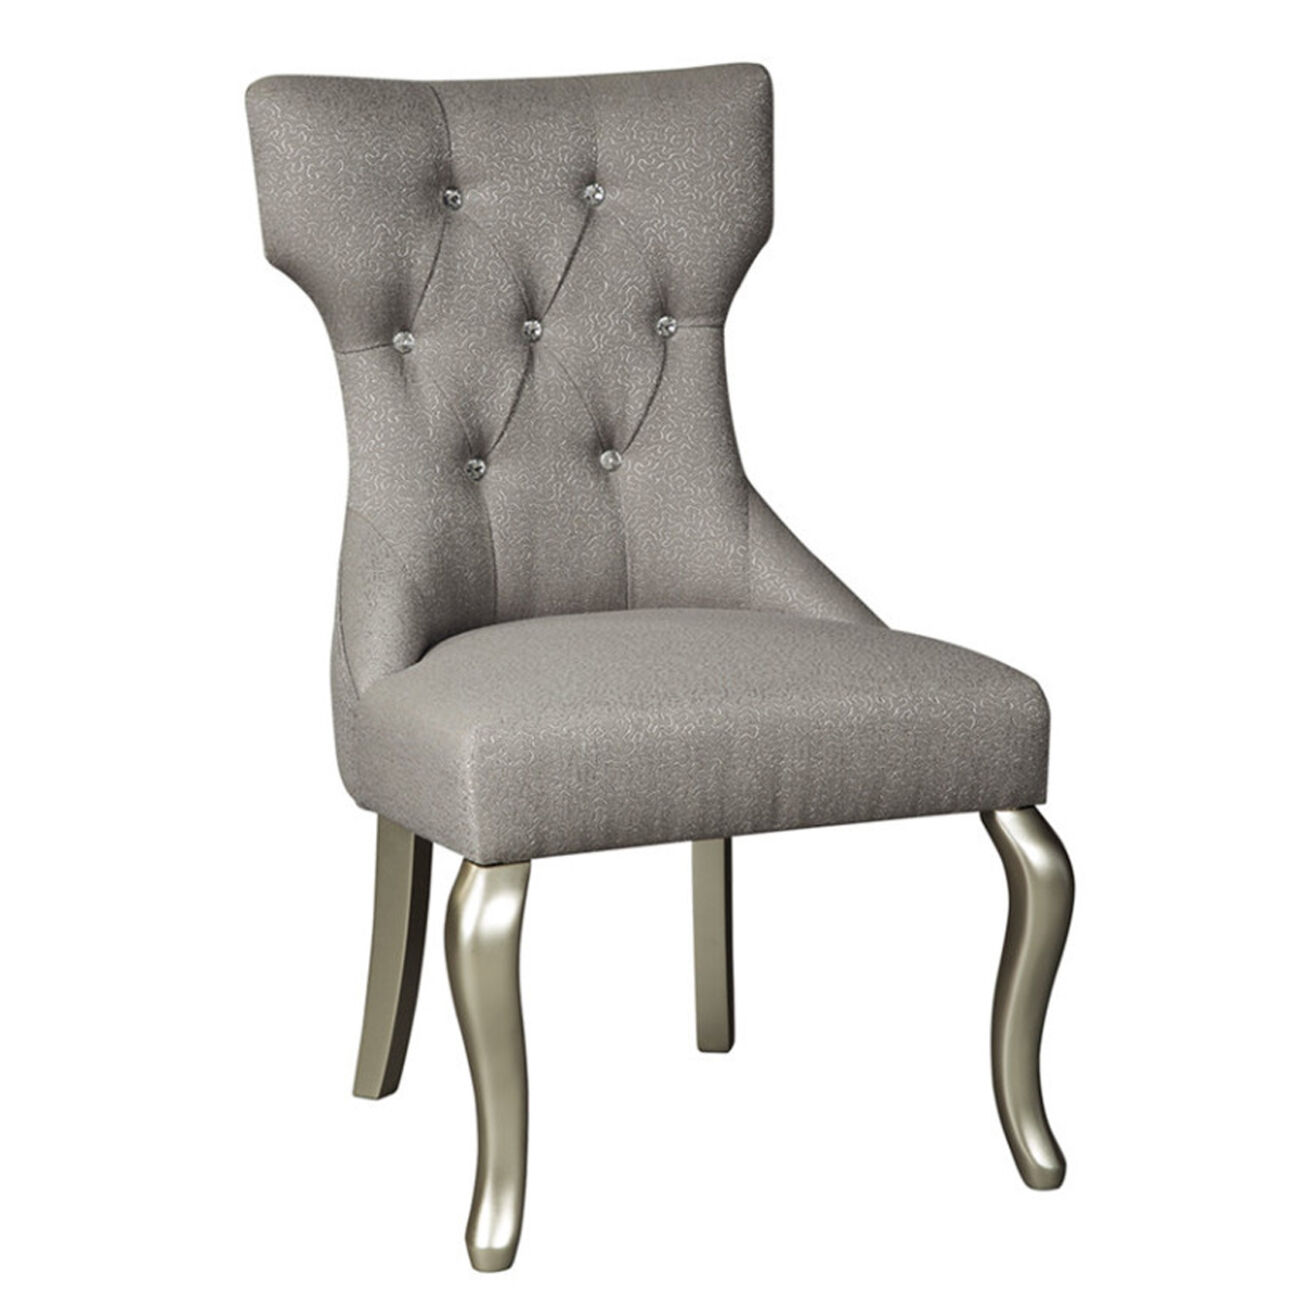 Polyester Upholstered Wooden Dining Side Chair with Cabriole Legs, Set of Two, Silver